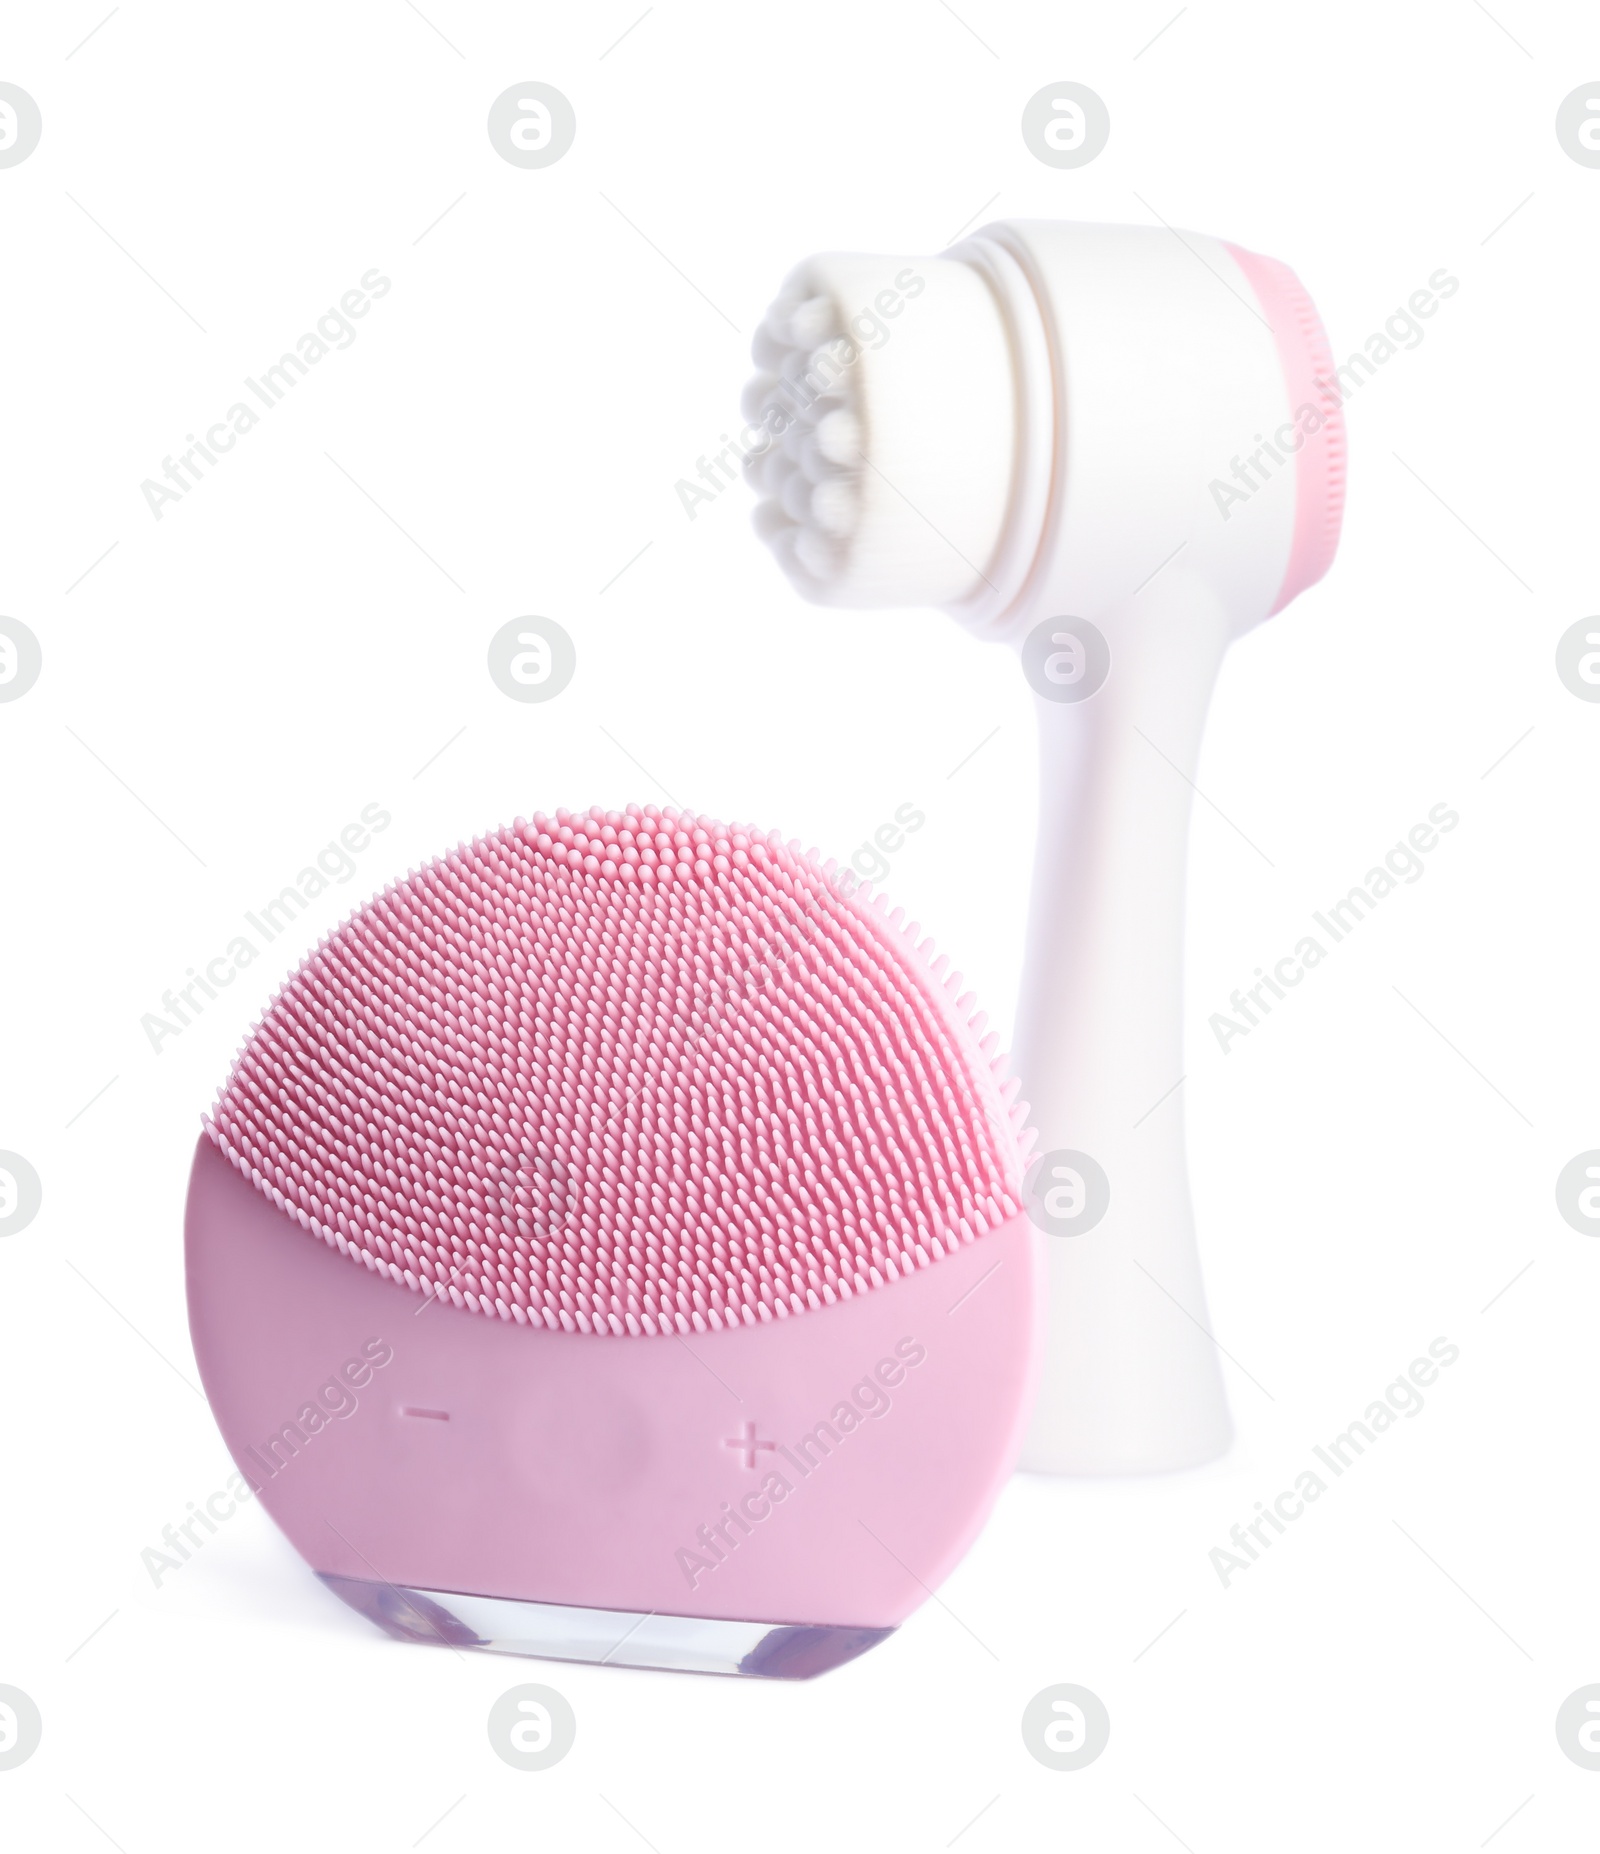 Photo of Modern electric face cleansing brushes isolated on white. Cosmetics tools